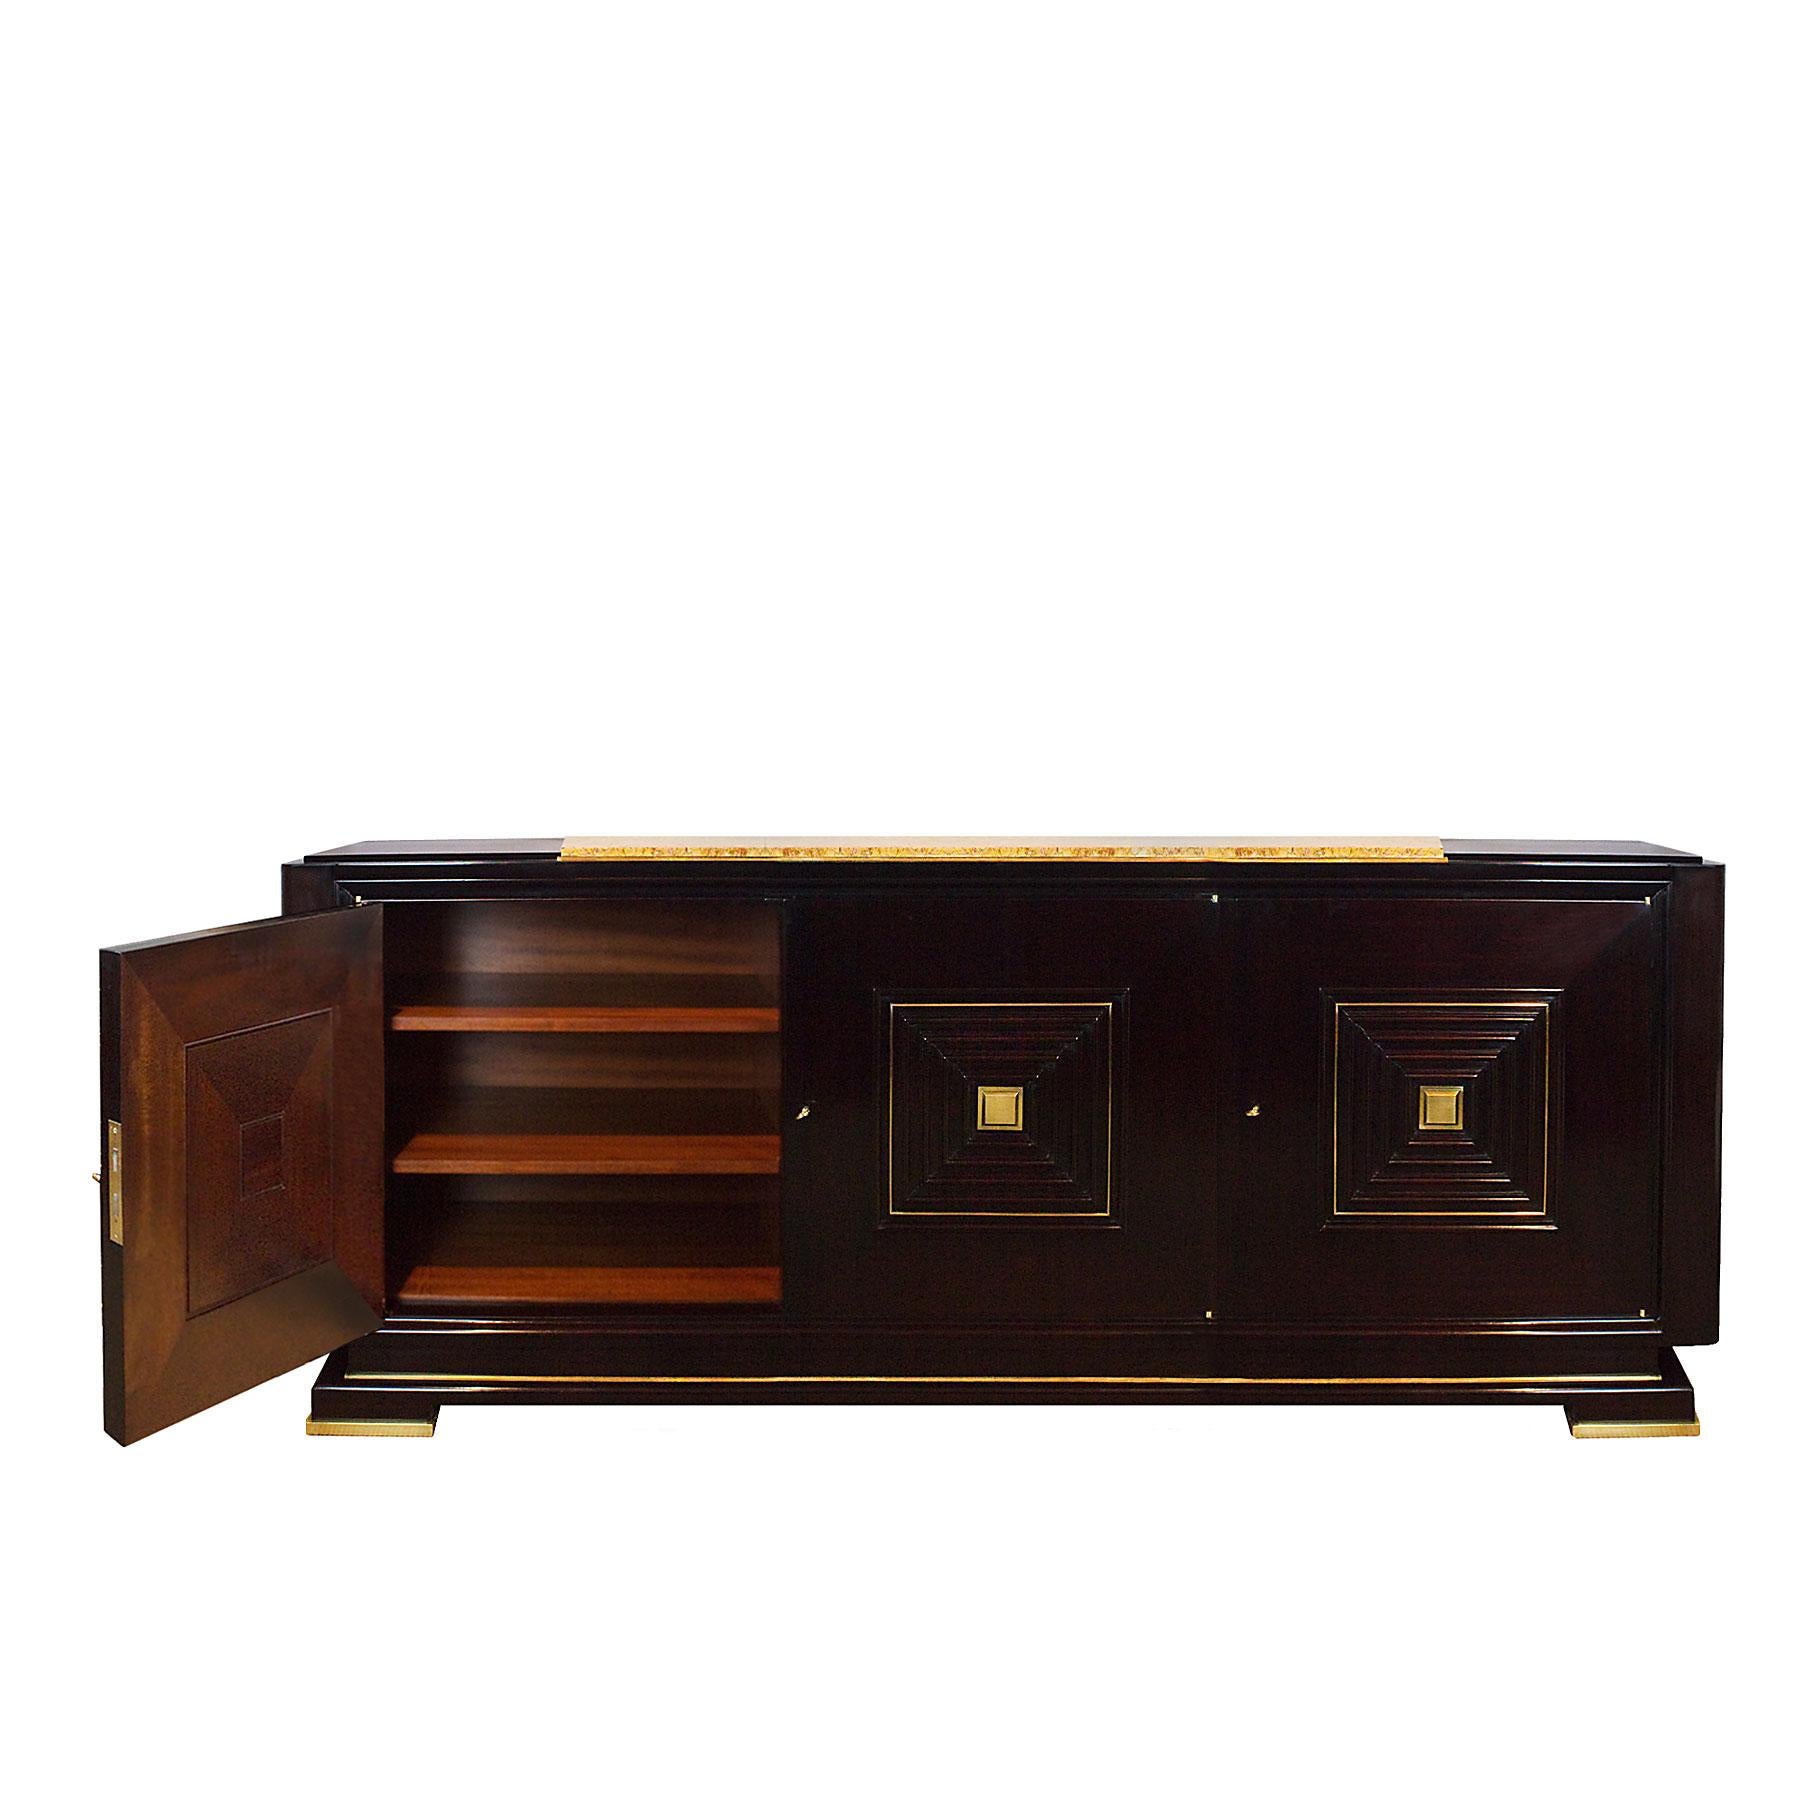 French Mid-Century Modern Sideboard in the Style of Maxime Old, Mahogany, Brass -France For Sale